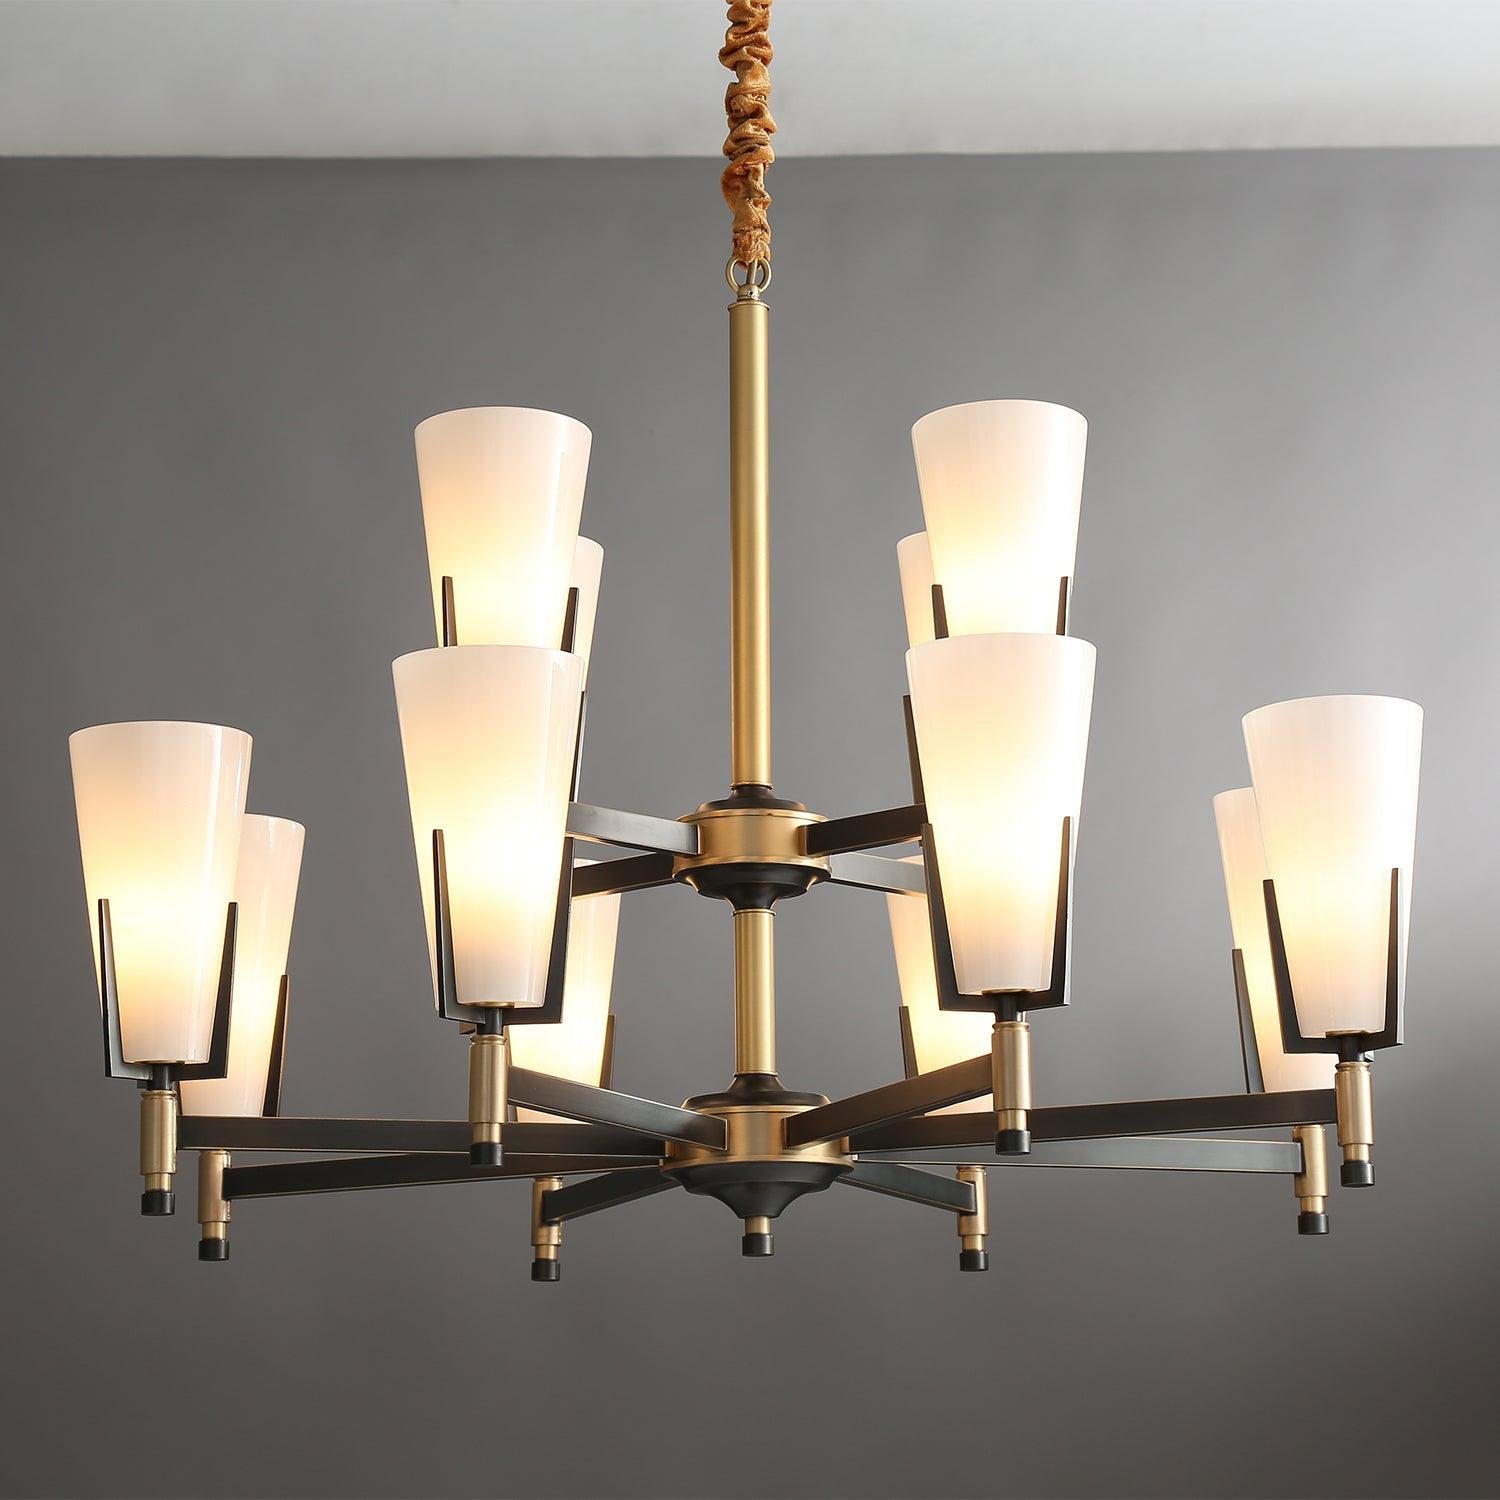 Upton Chandelier with 12 Heads, 35.4" Diameter x 26" Height - 90cm x 66cm, in Black and White.